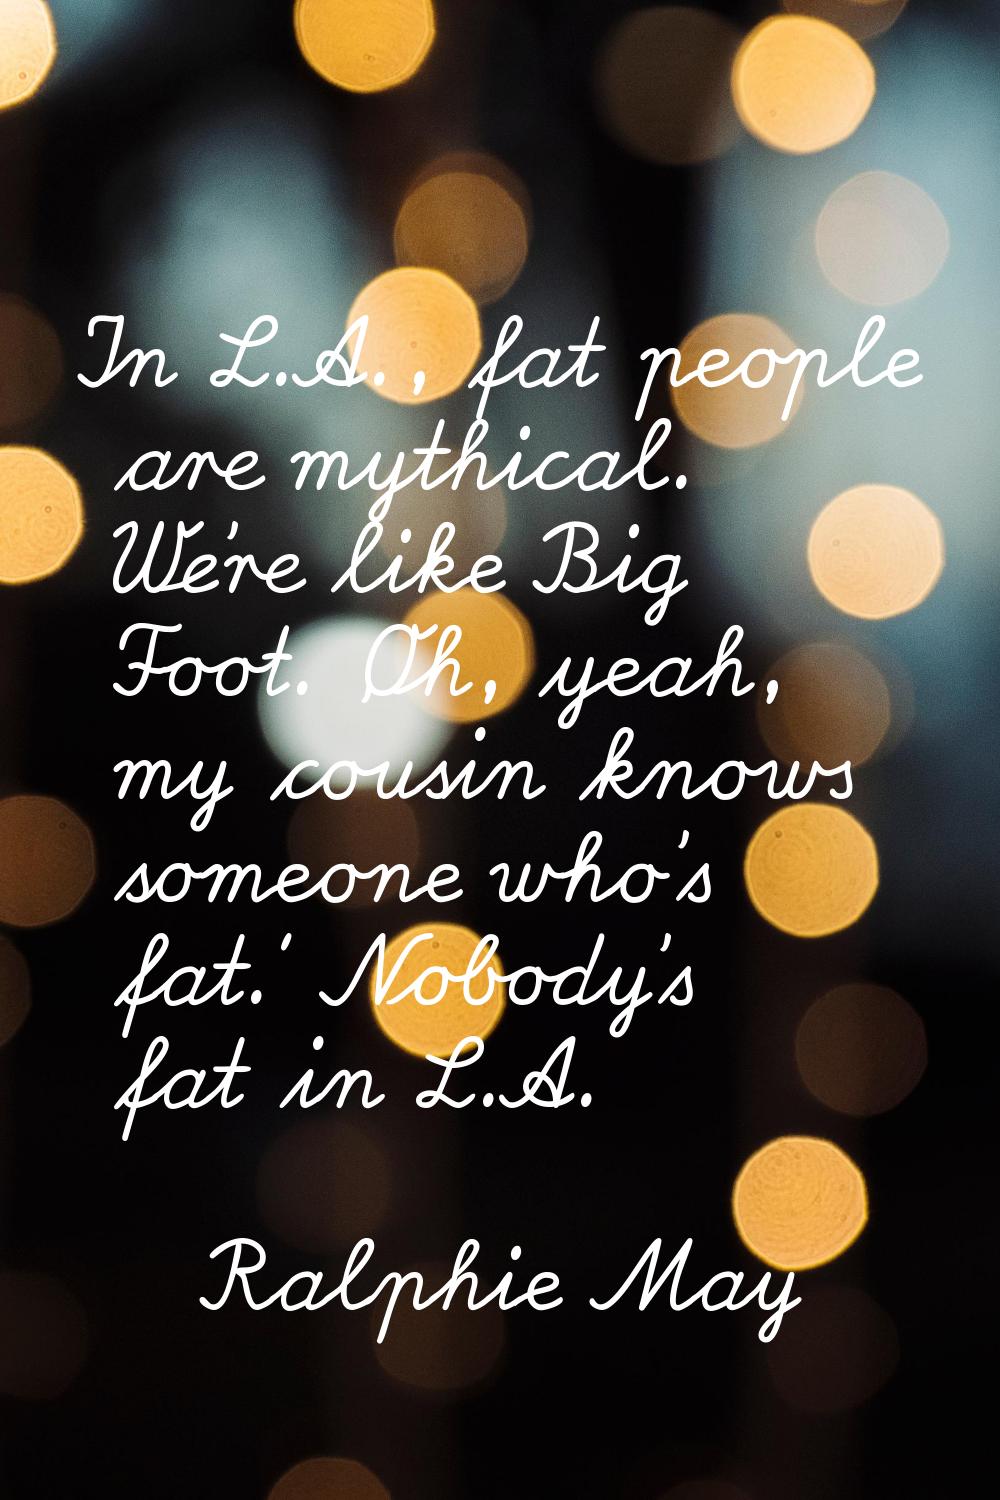 In L.A., fat people are mythical. We're like Big Foot. 'Oh, yeah, my cousin knows someone who's fat